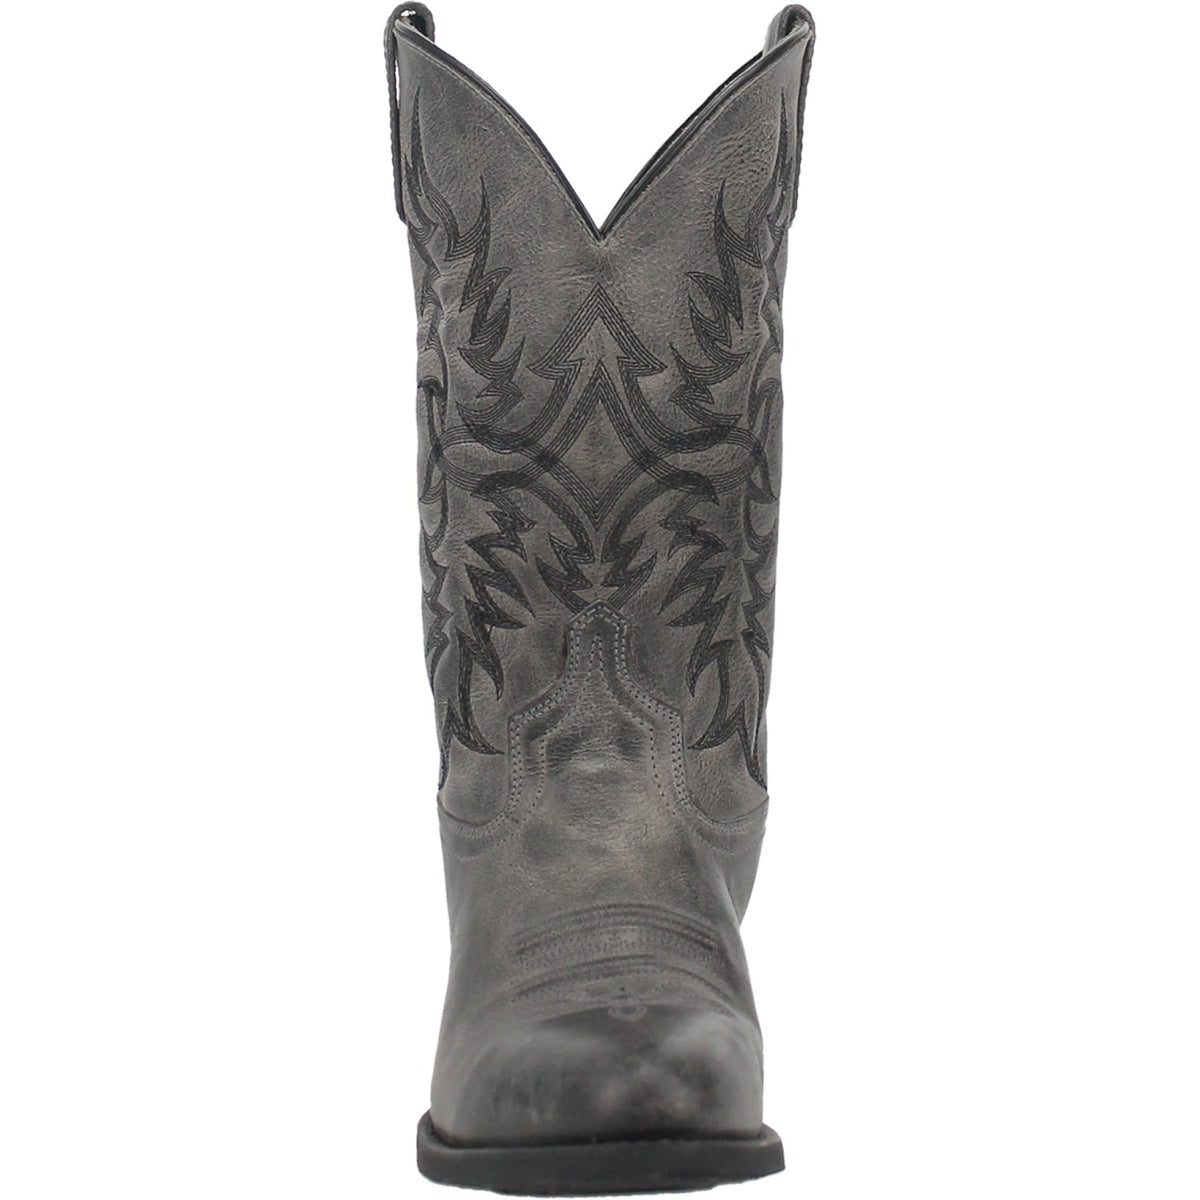 HARDING LEATHER BOOT Cover